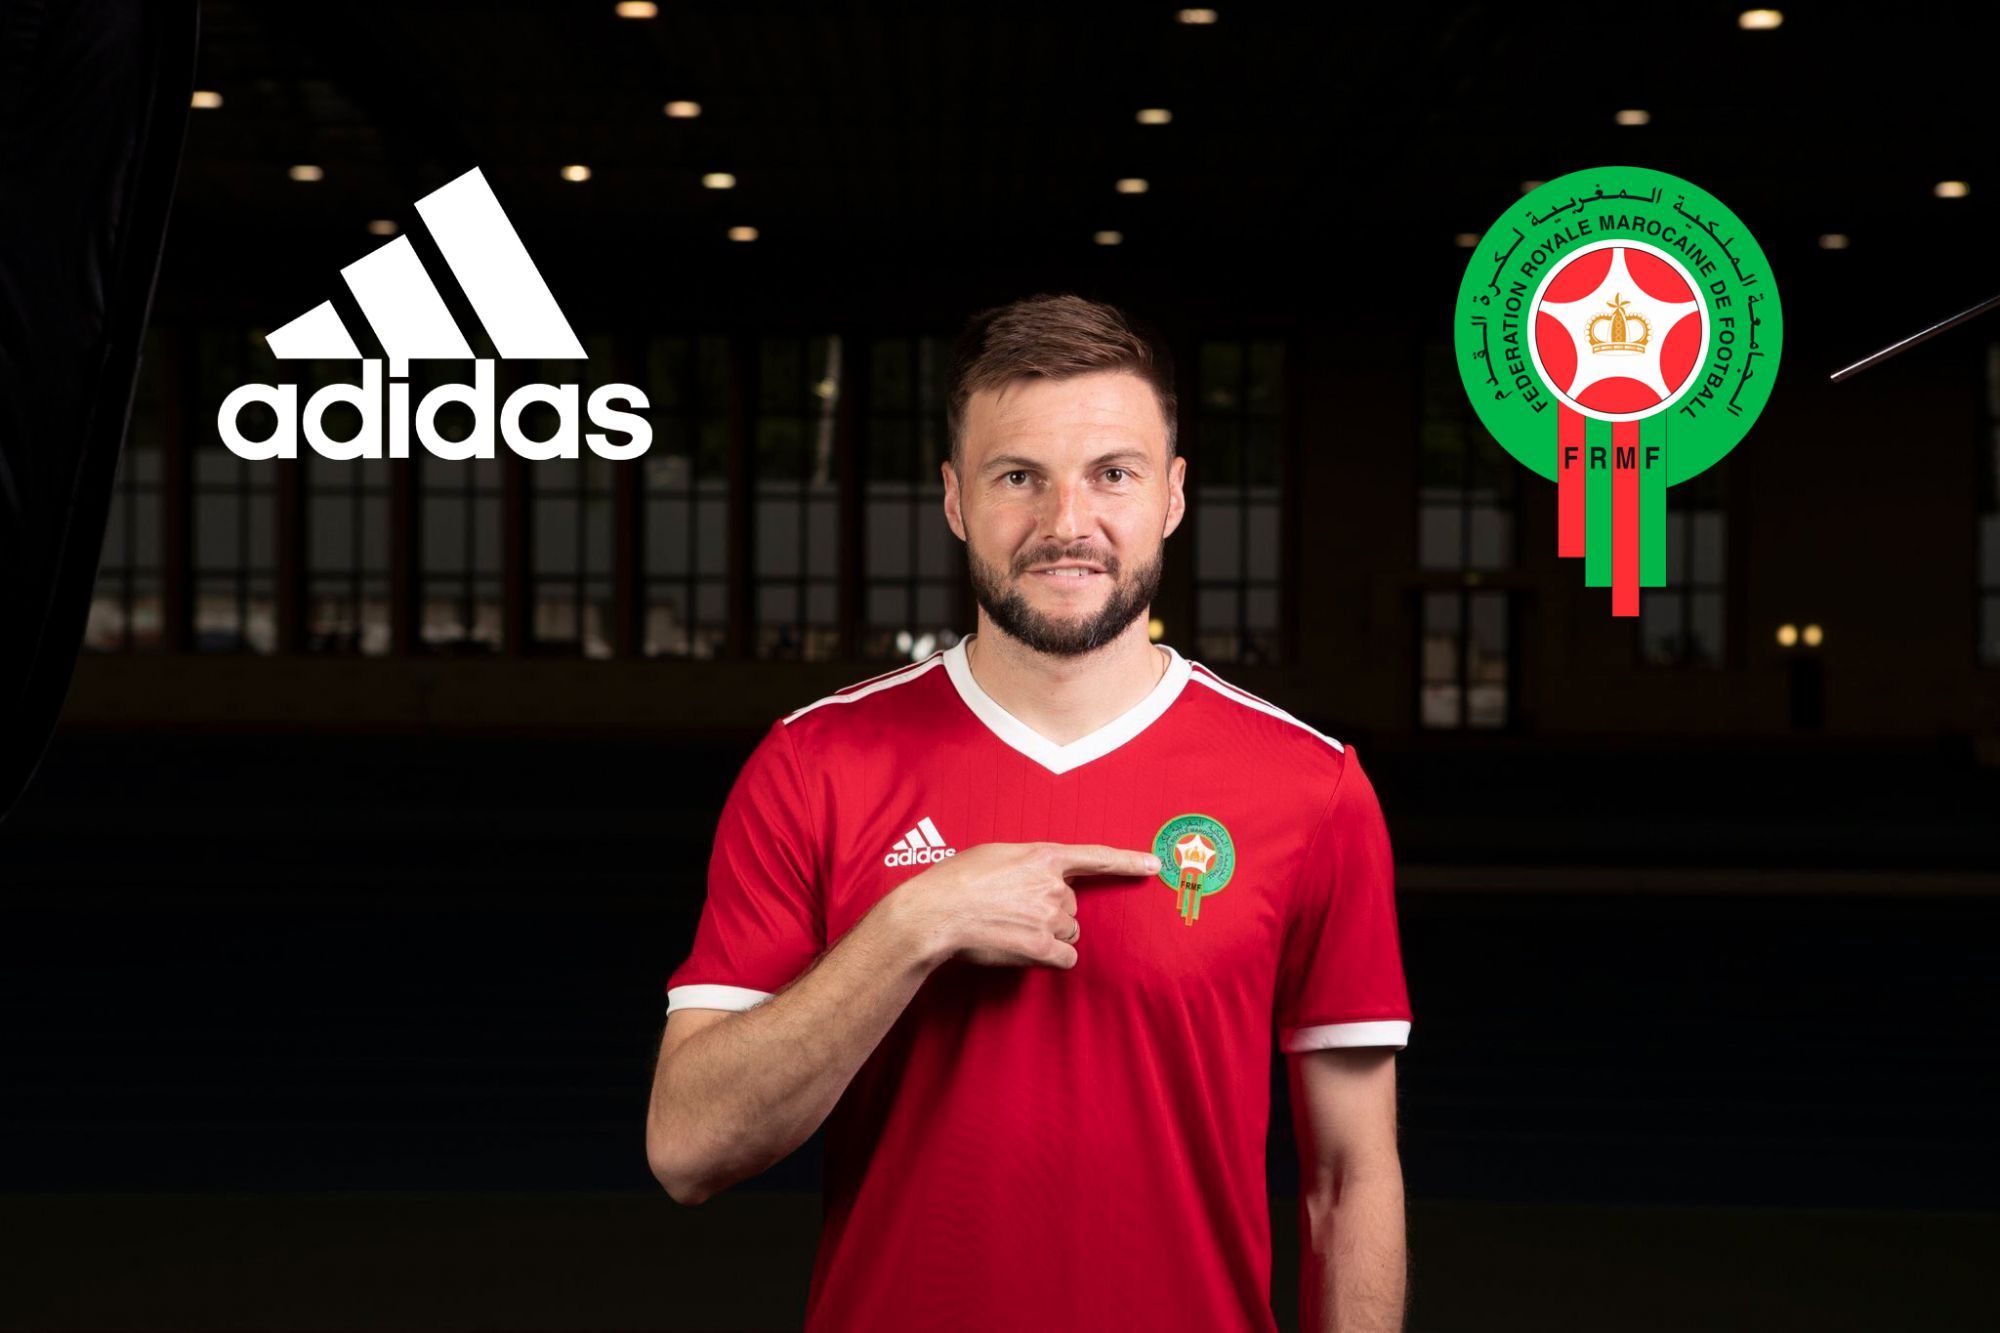 terwijl blok gedragen There is a big problem between Morocco and adidas